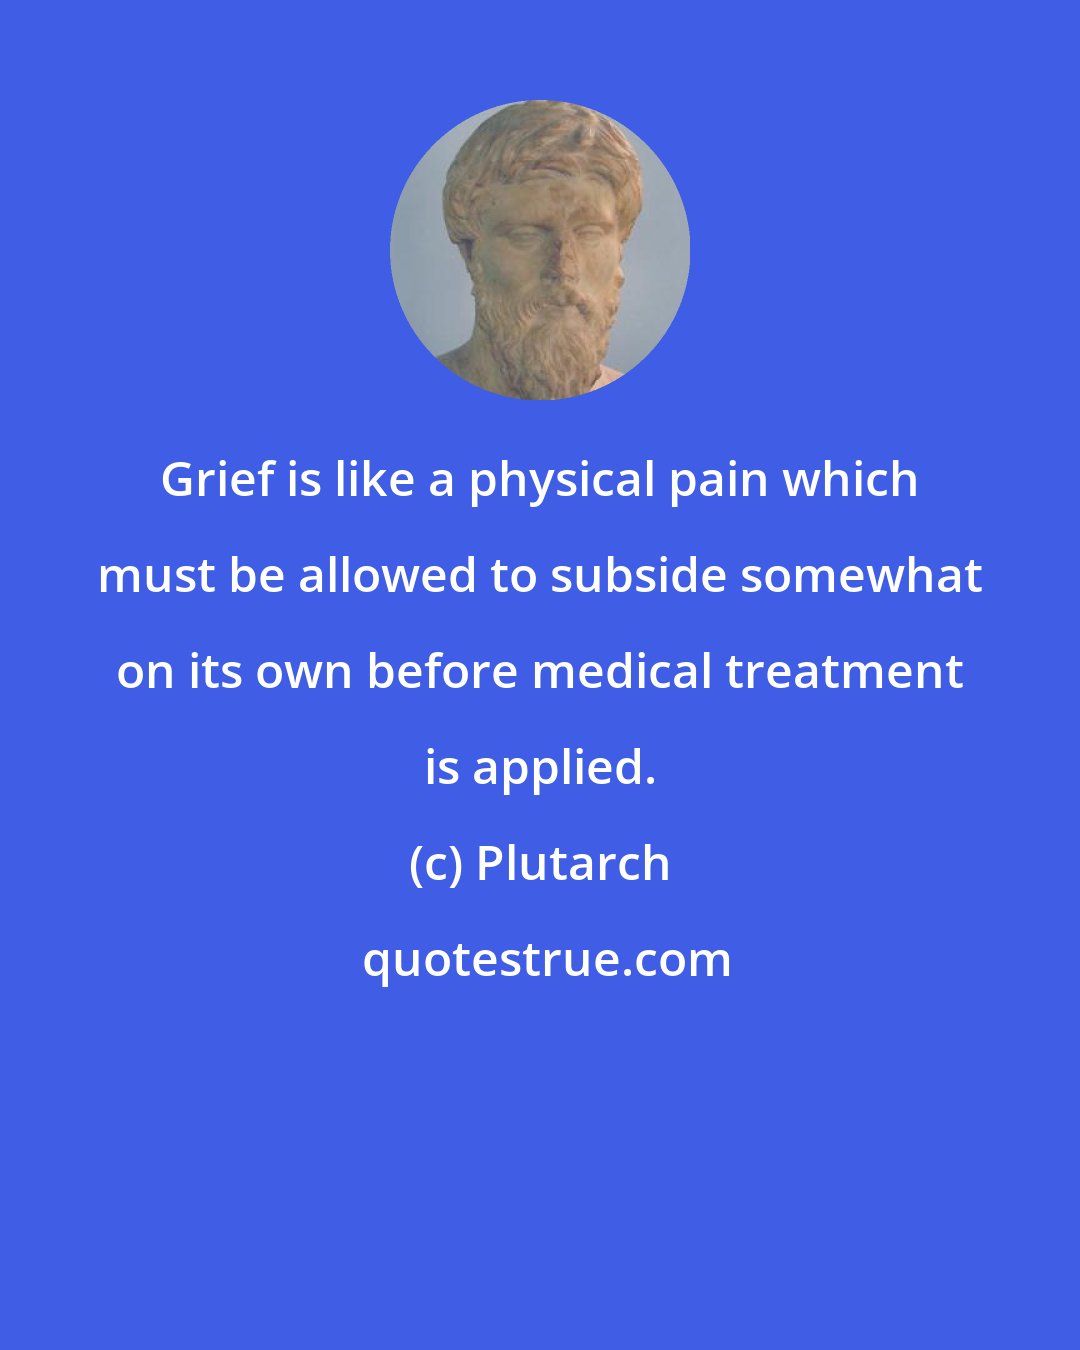 Plutarch: Grief is like a physical pain which must be allowed to subside somewhat on its own before medical treatment is applied.